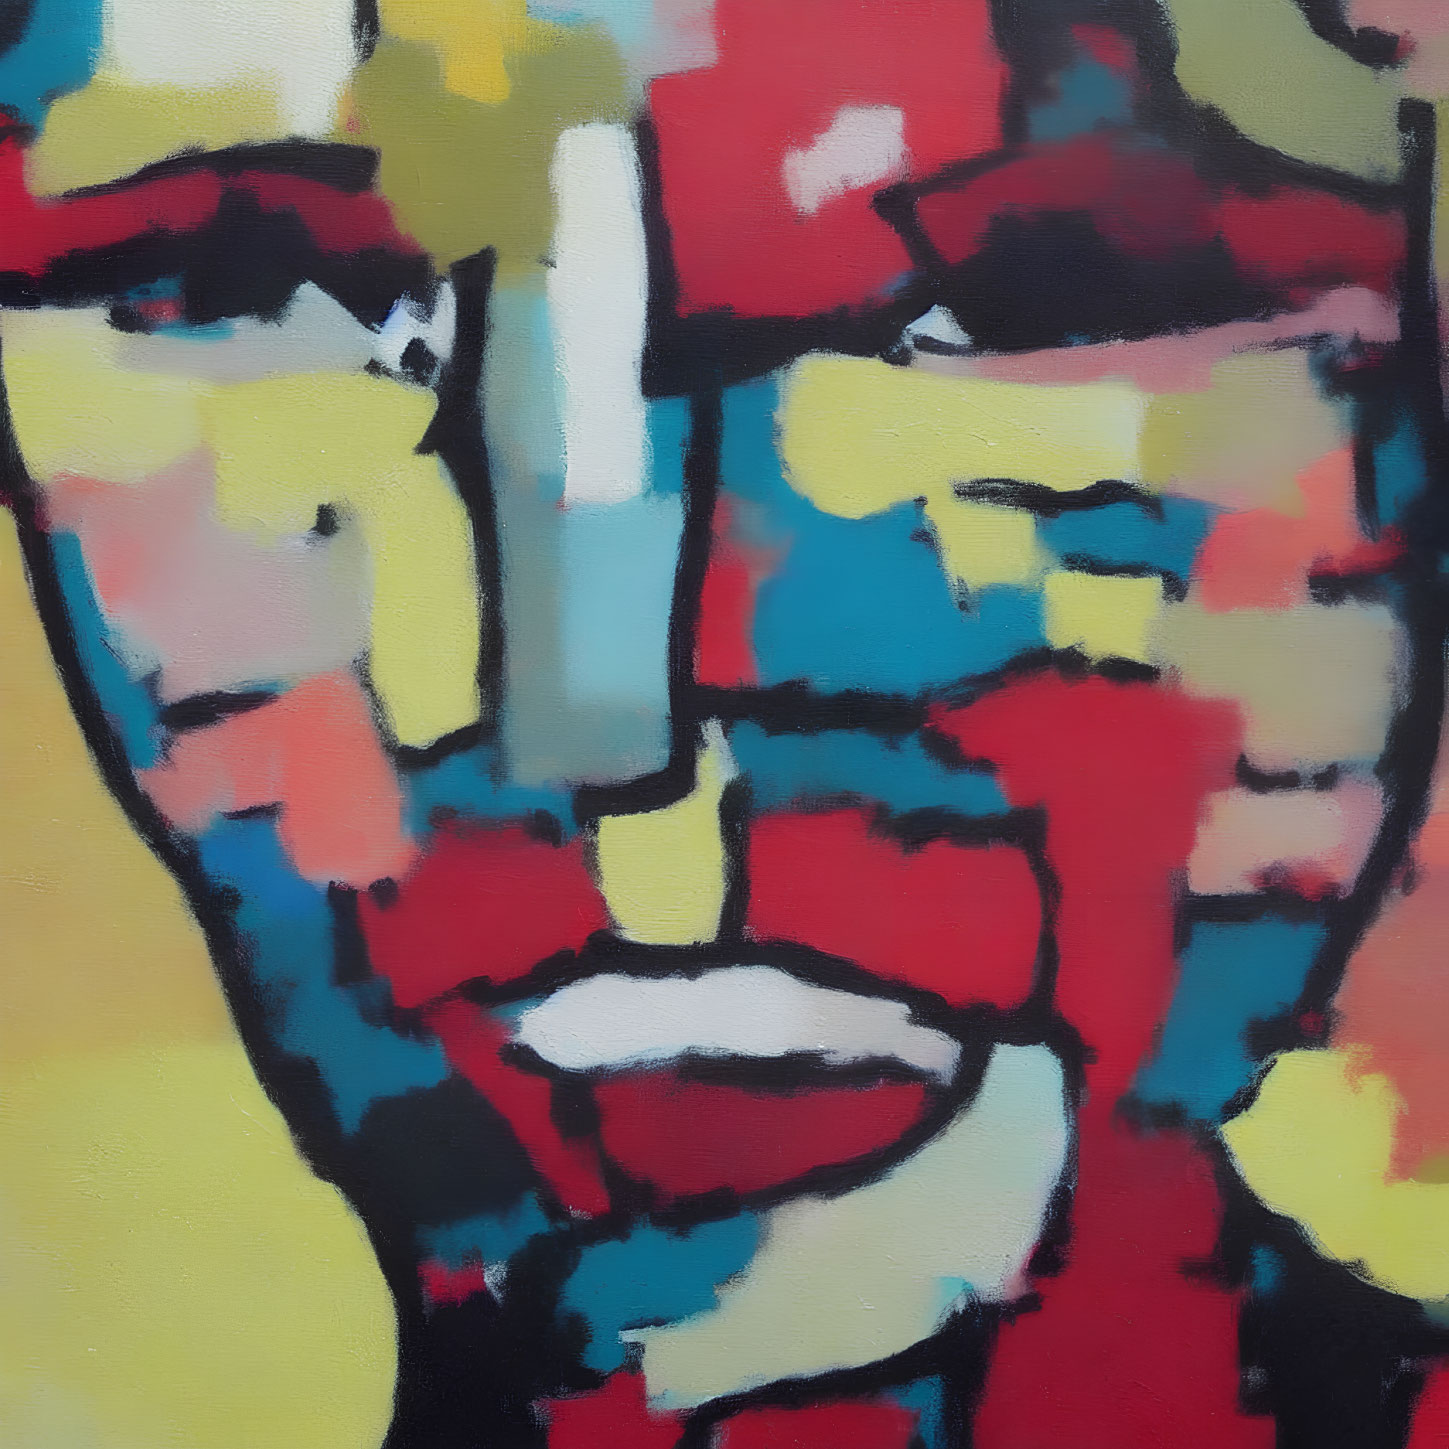 Vibrant abstract painting of a face with bold, colorful blocks.